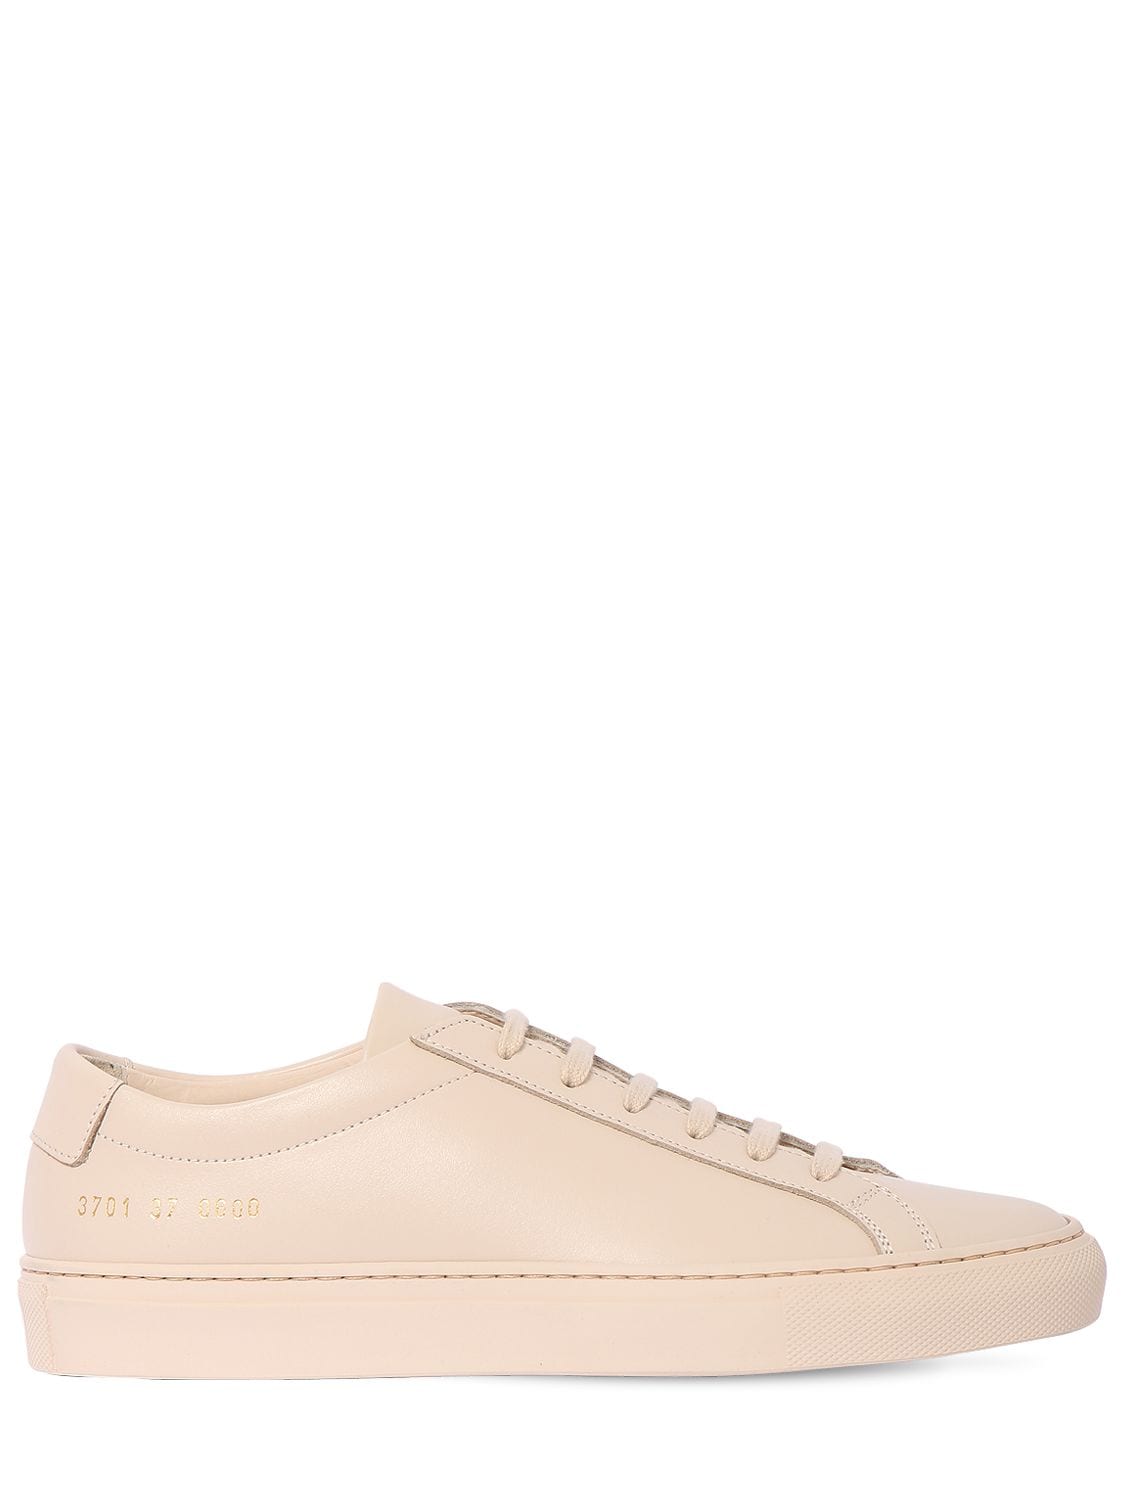 common projects sale website